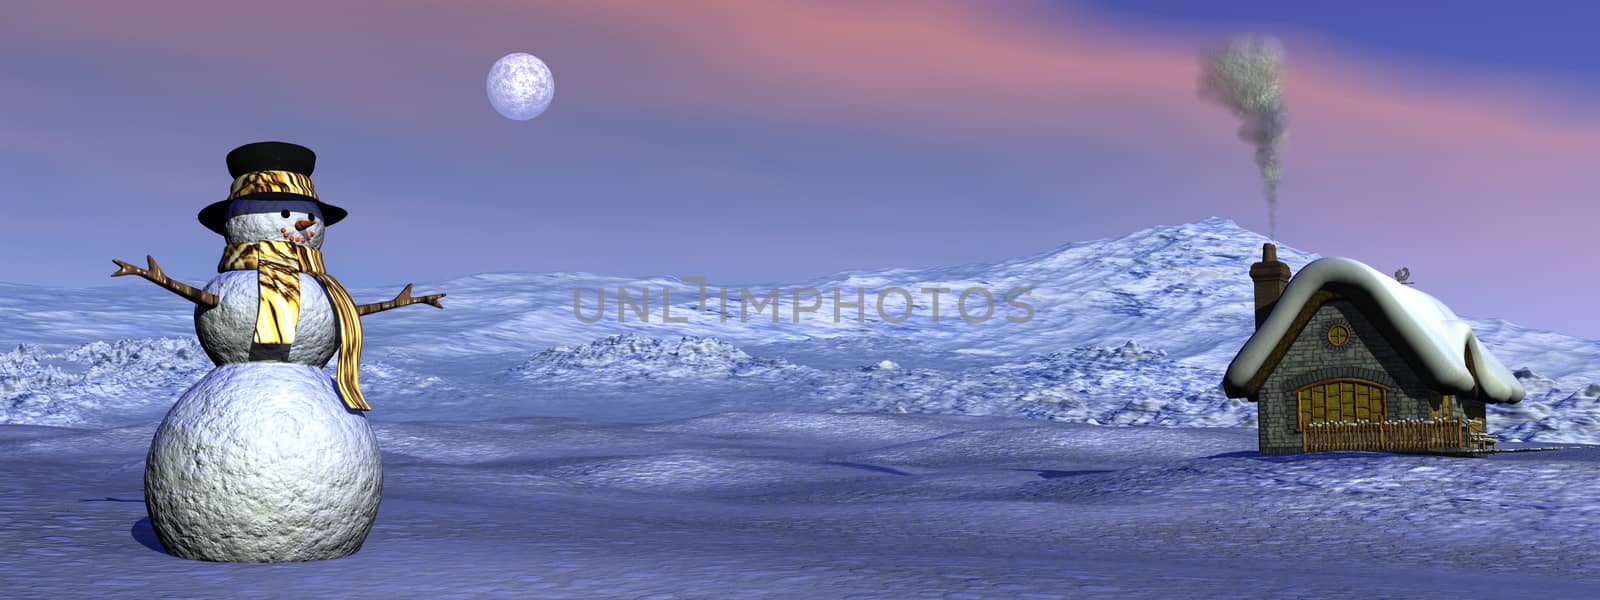 Snowman standing next to a cottage on snowy hill by night with full moon - 3D render